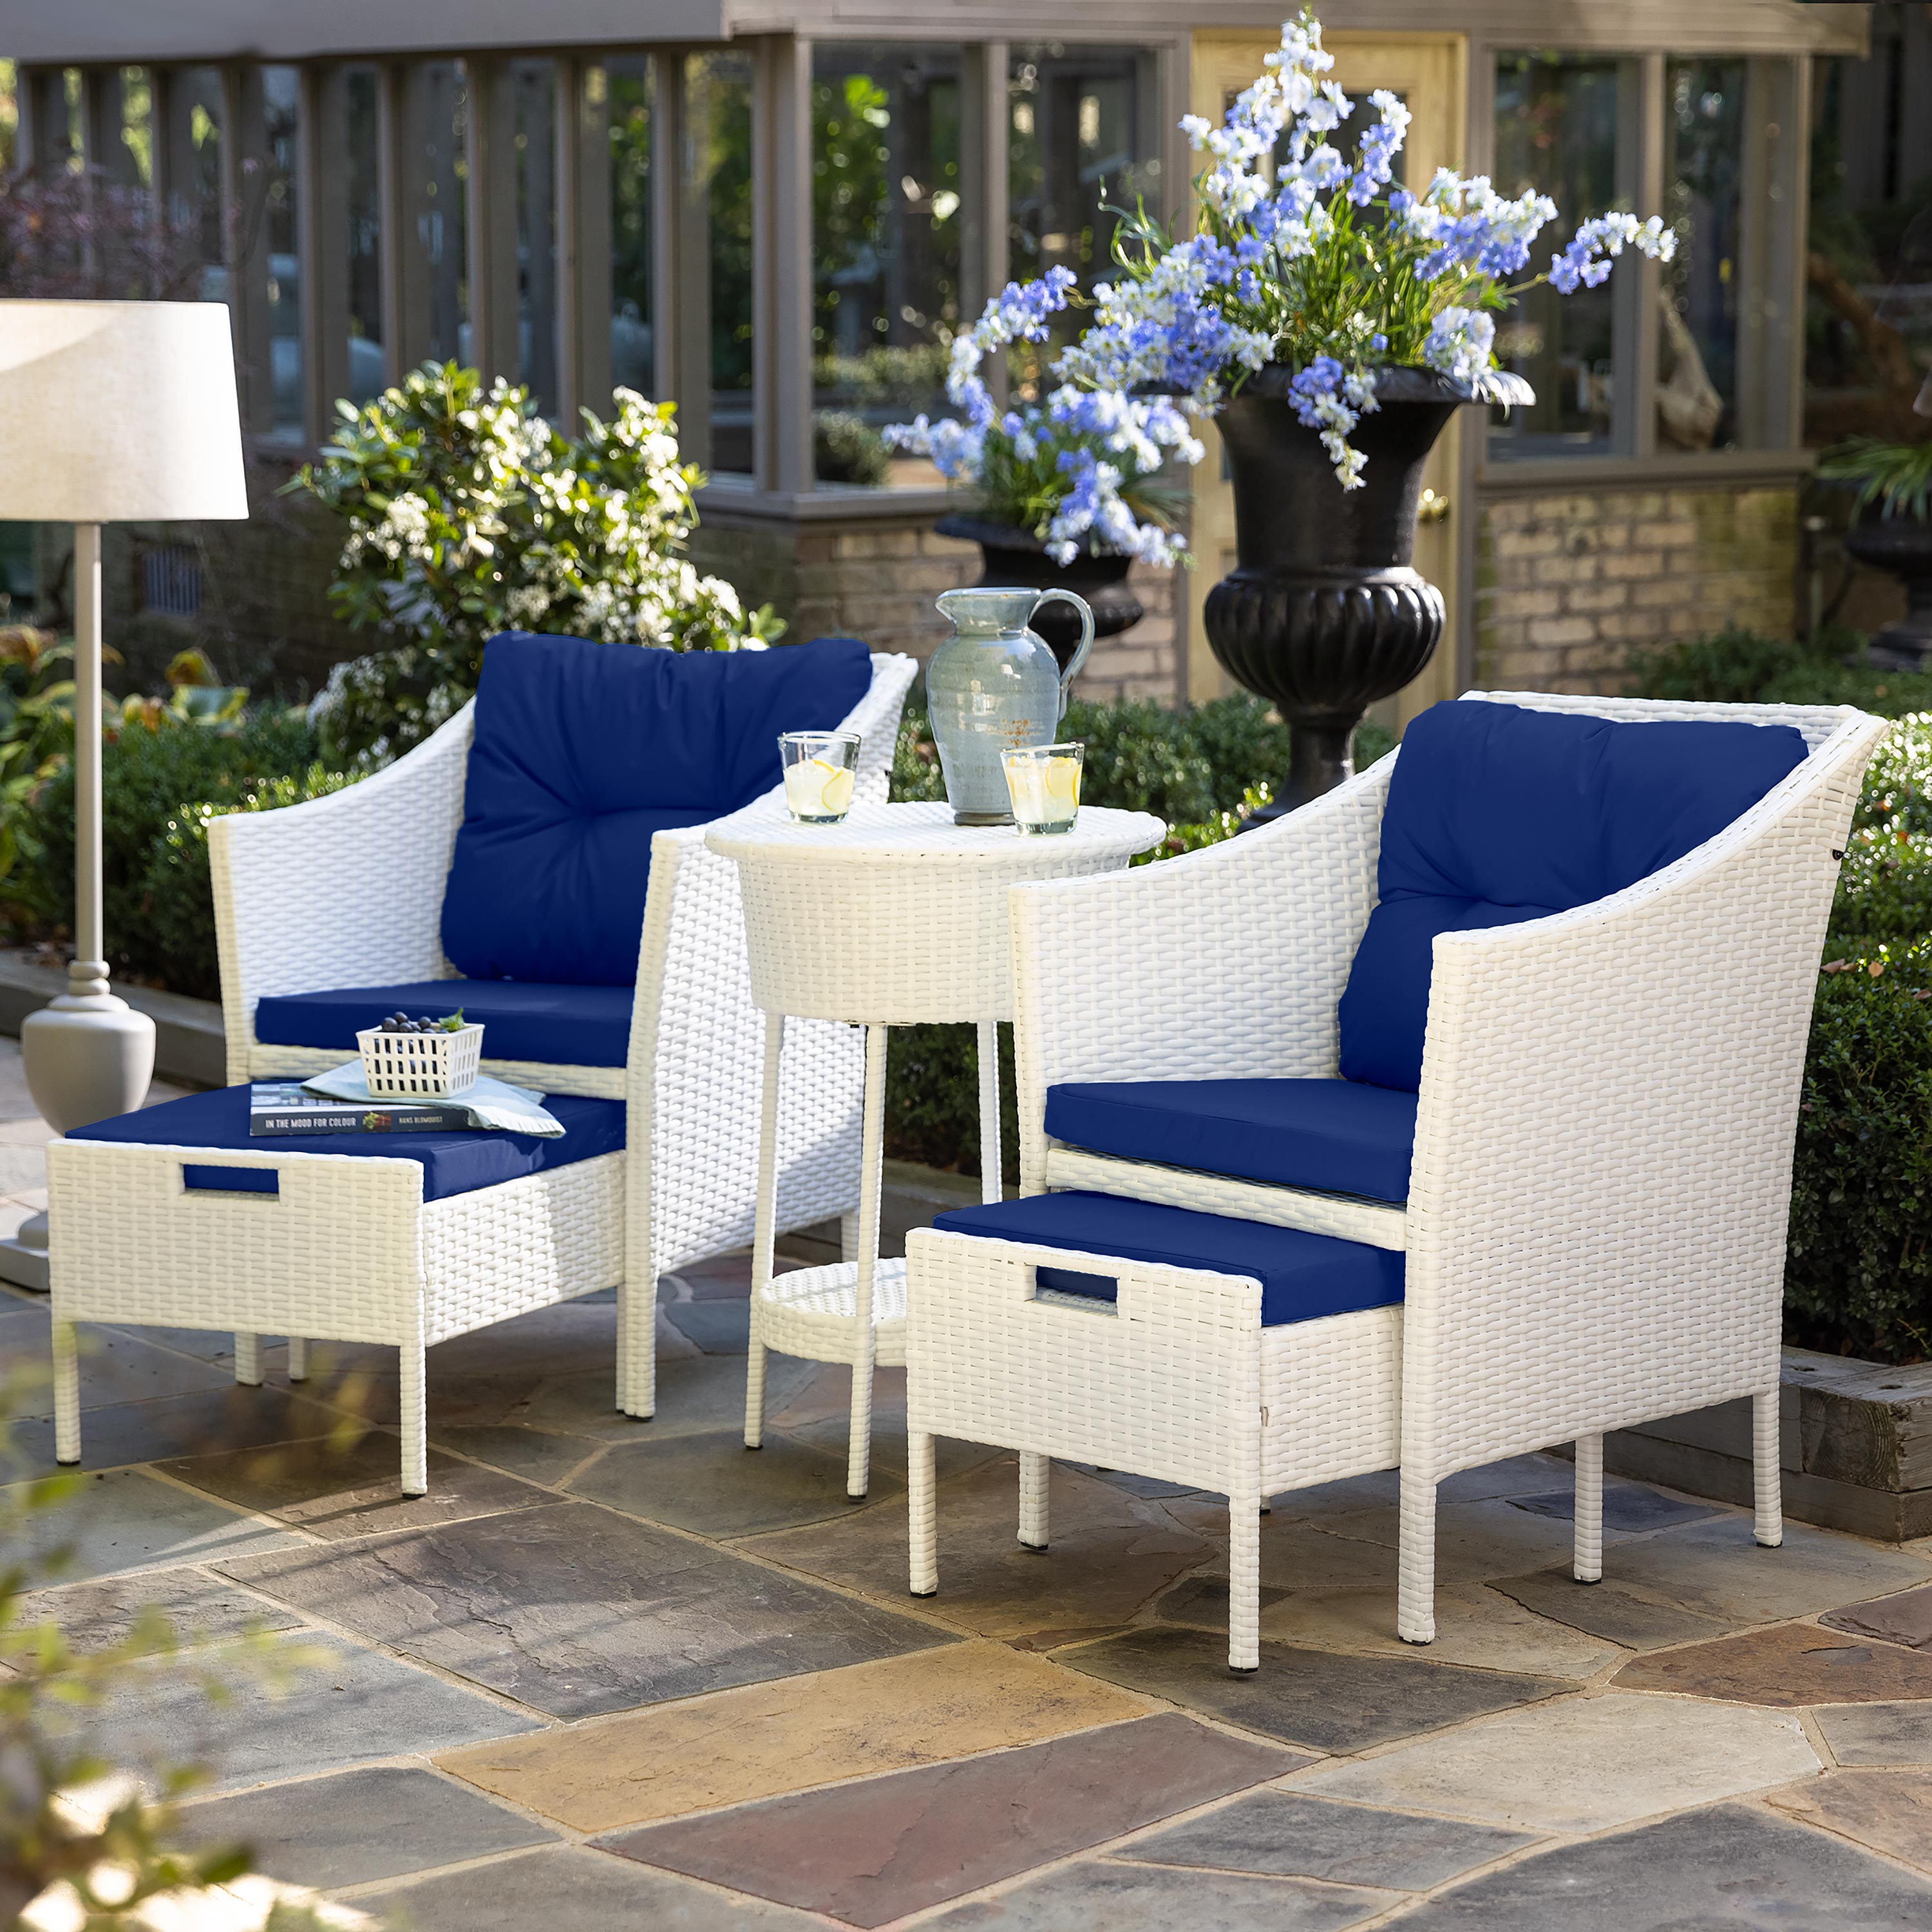 Harbor Moon Chat Set with Hideaway Ottomans and Cooler Table